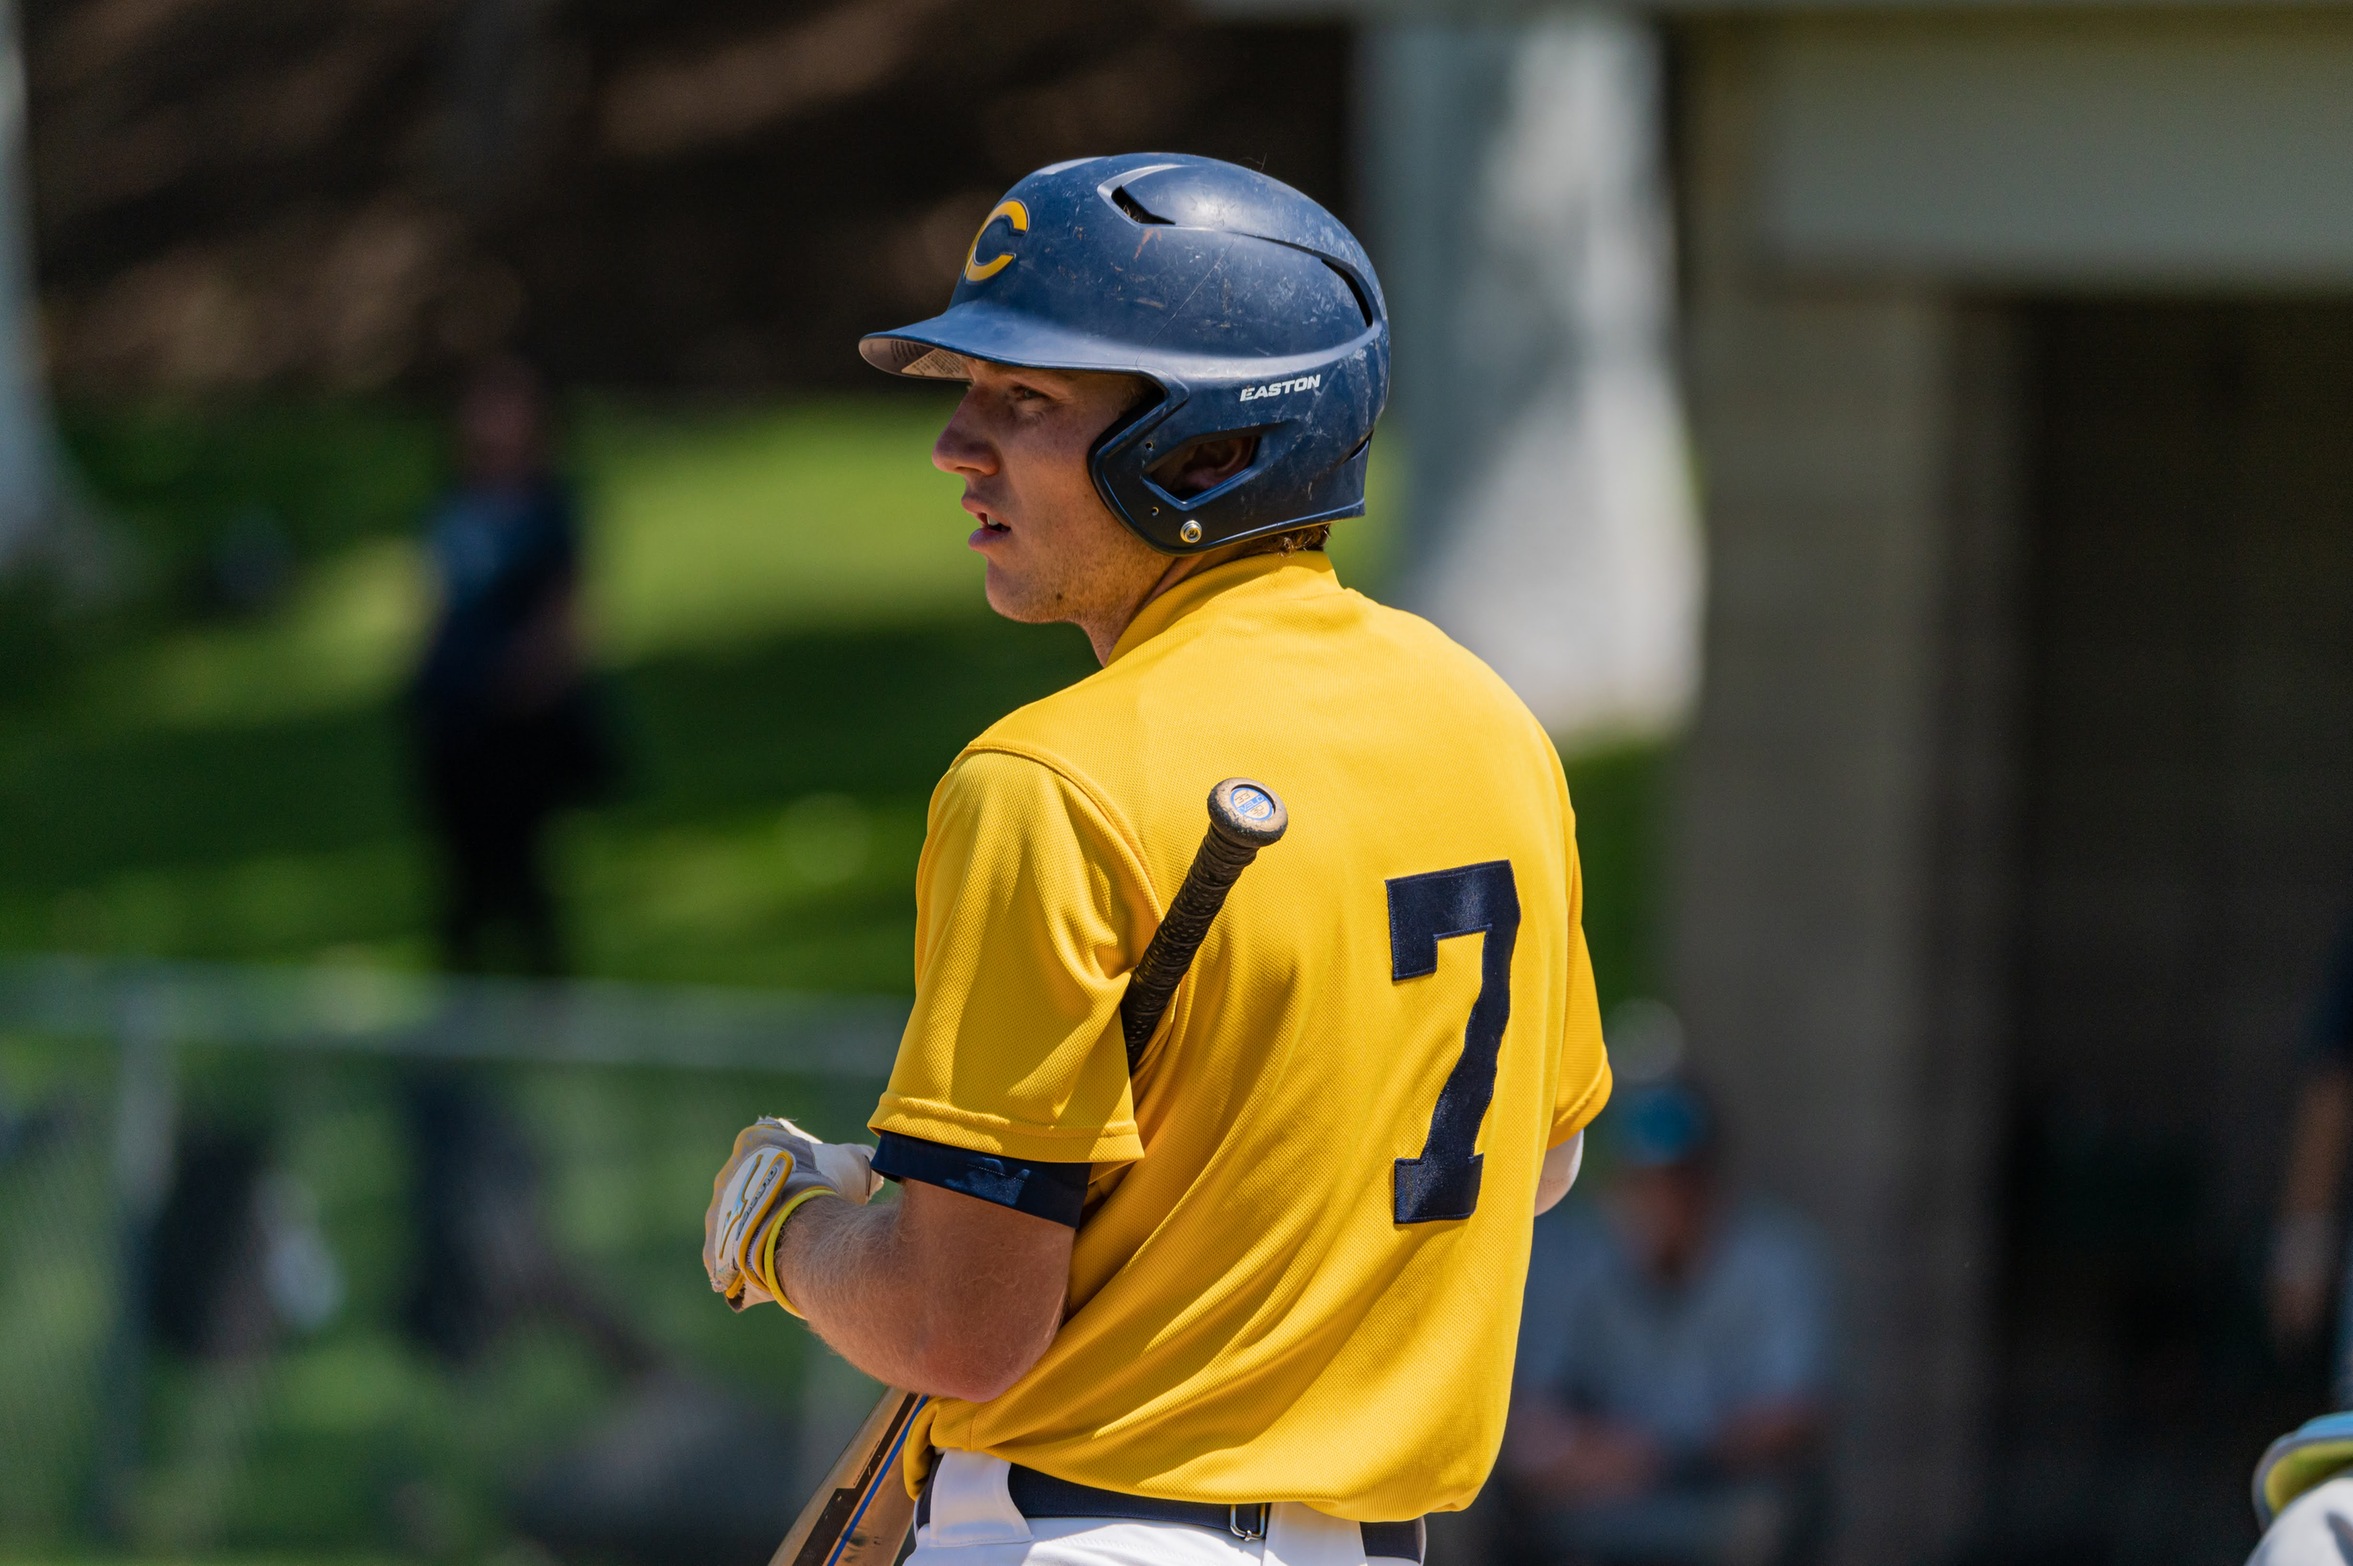 Stock image of College of the Canyons baseball student-athlete Mikey Kane.